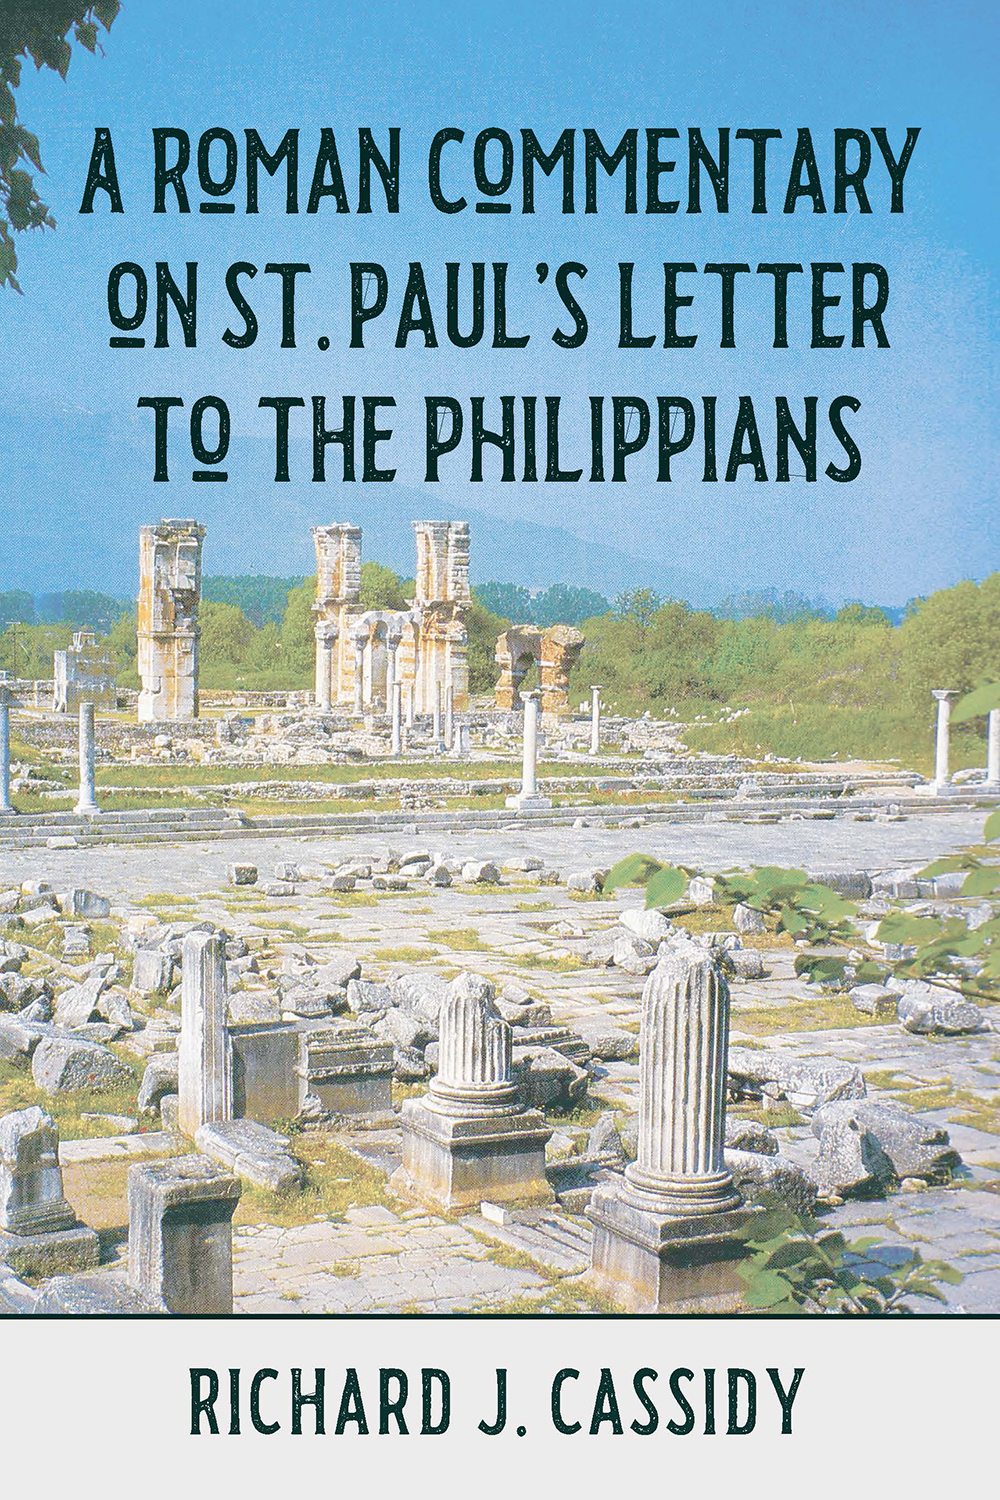 A Roman Commentary on St. Paul’s Letter to the Philippians